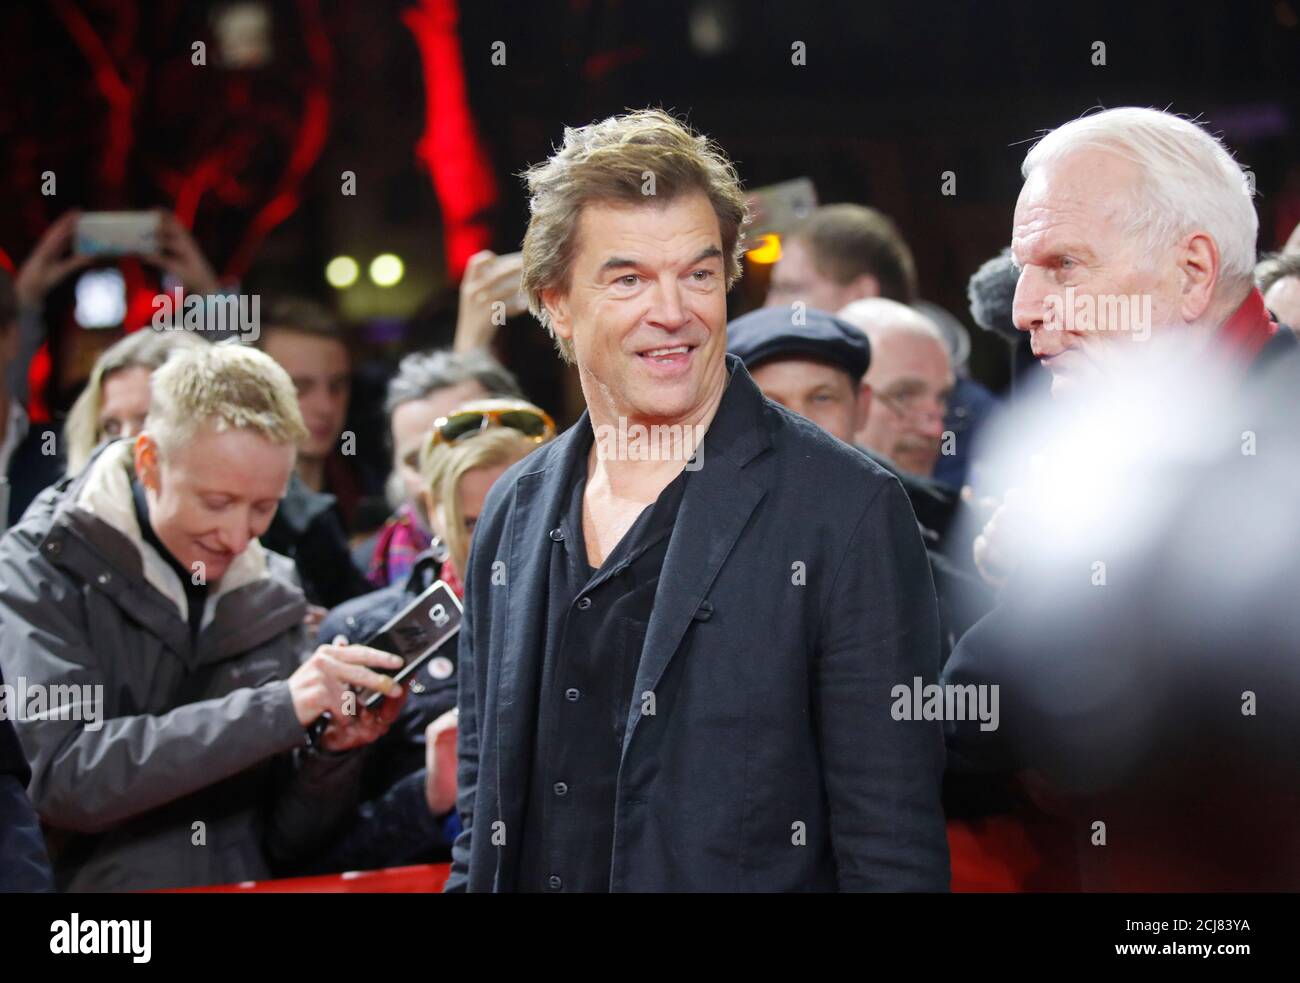 Member of the band Die Toten Hosen Campino, arrives for the screening of  the movie "Weil du nur einmal lebst - Die Toten Hosen auf Tour " (You Only  Live Once -